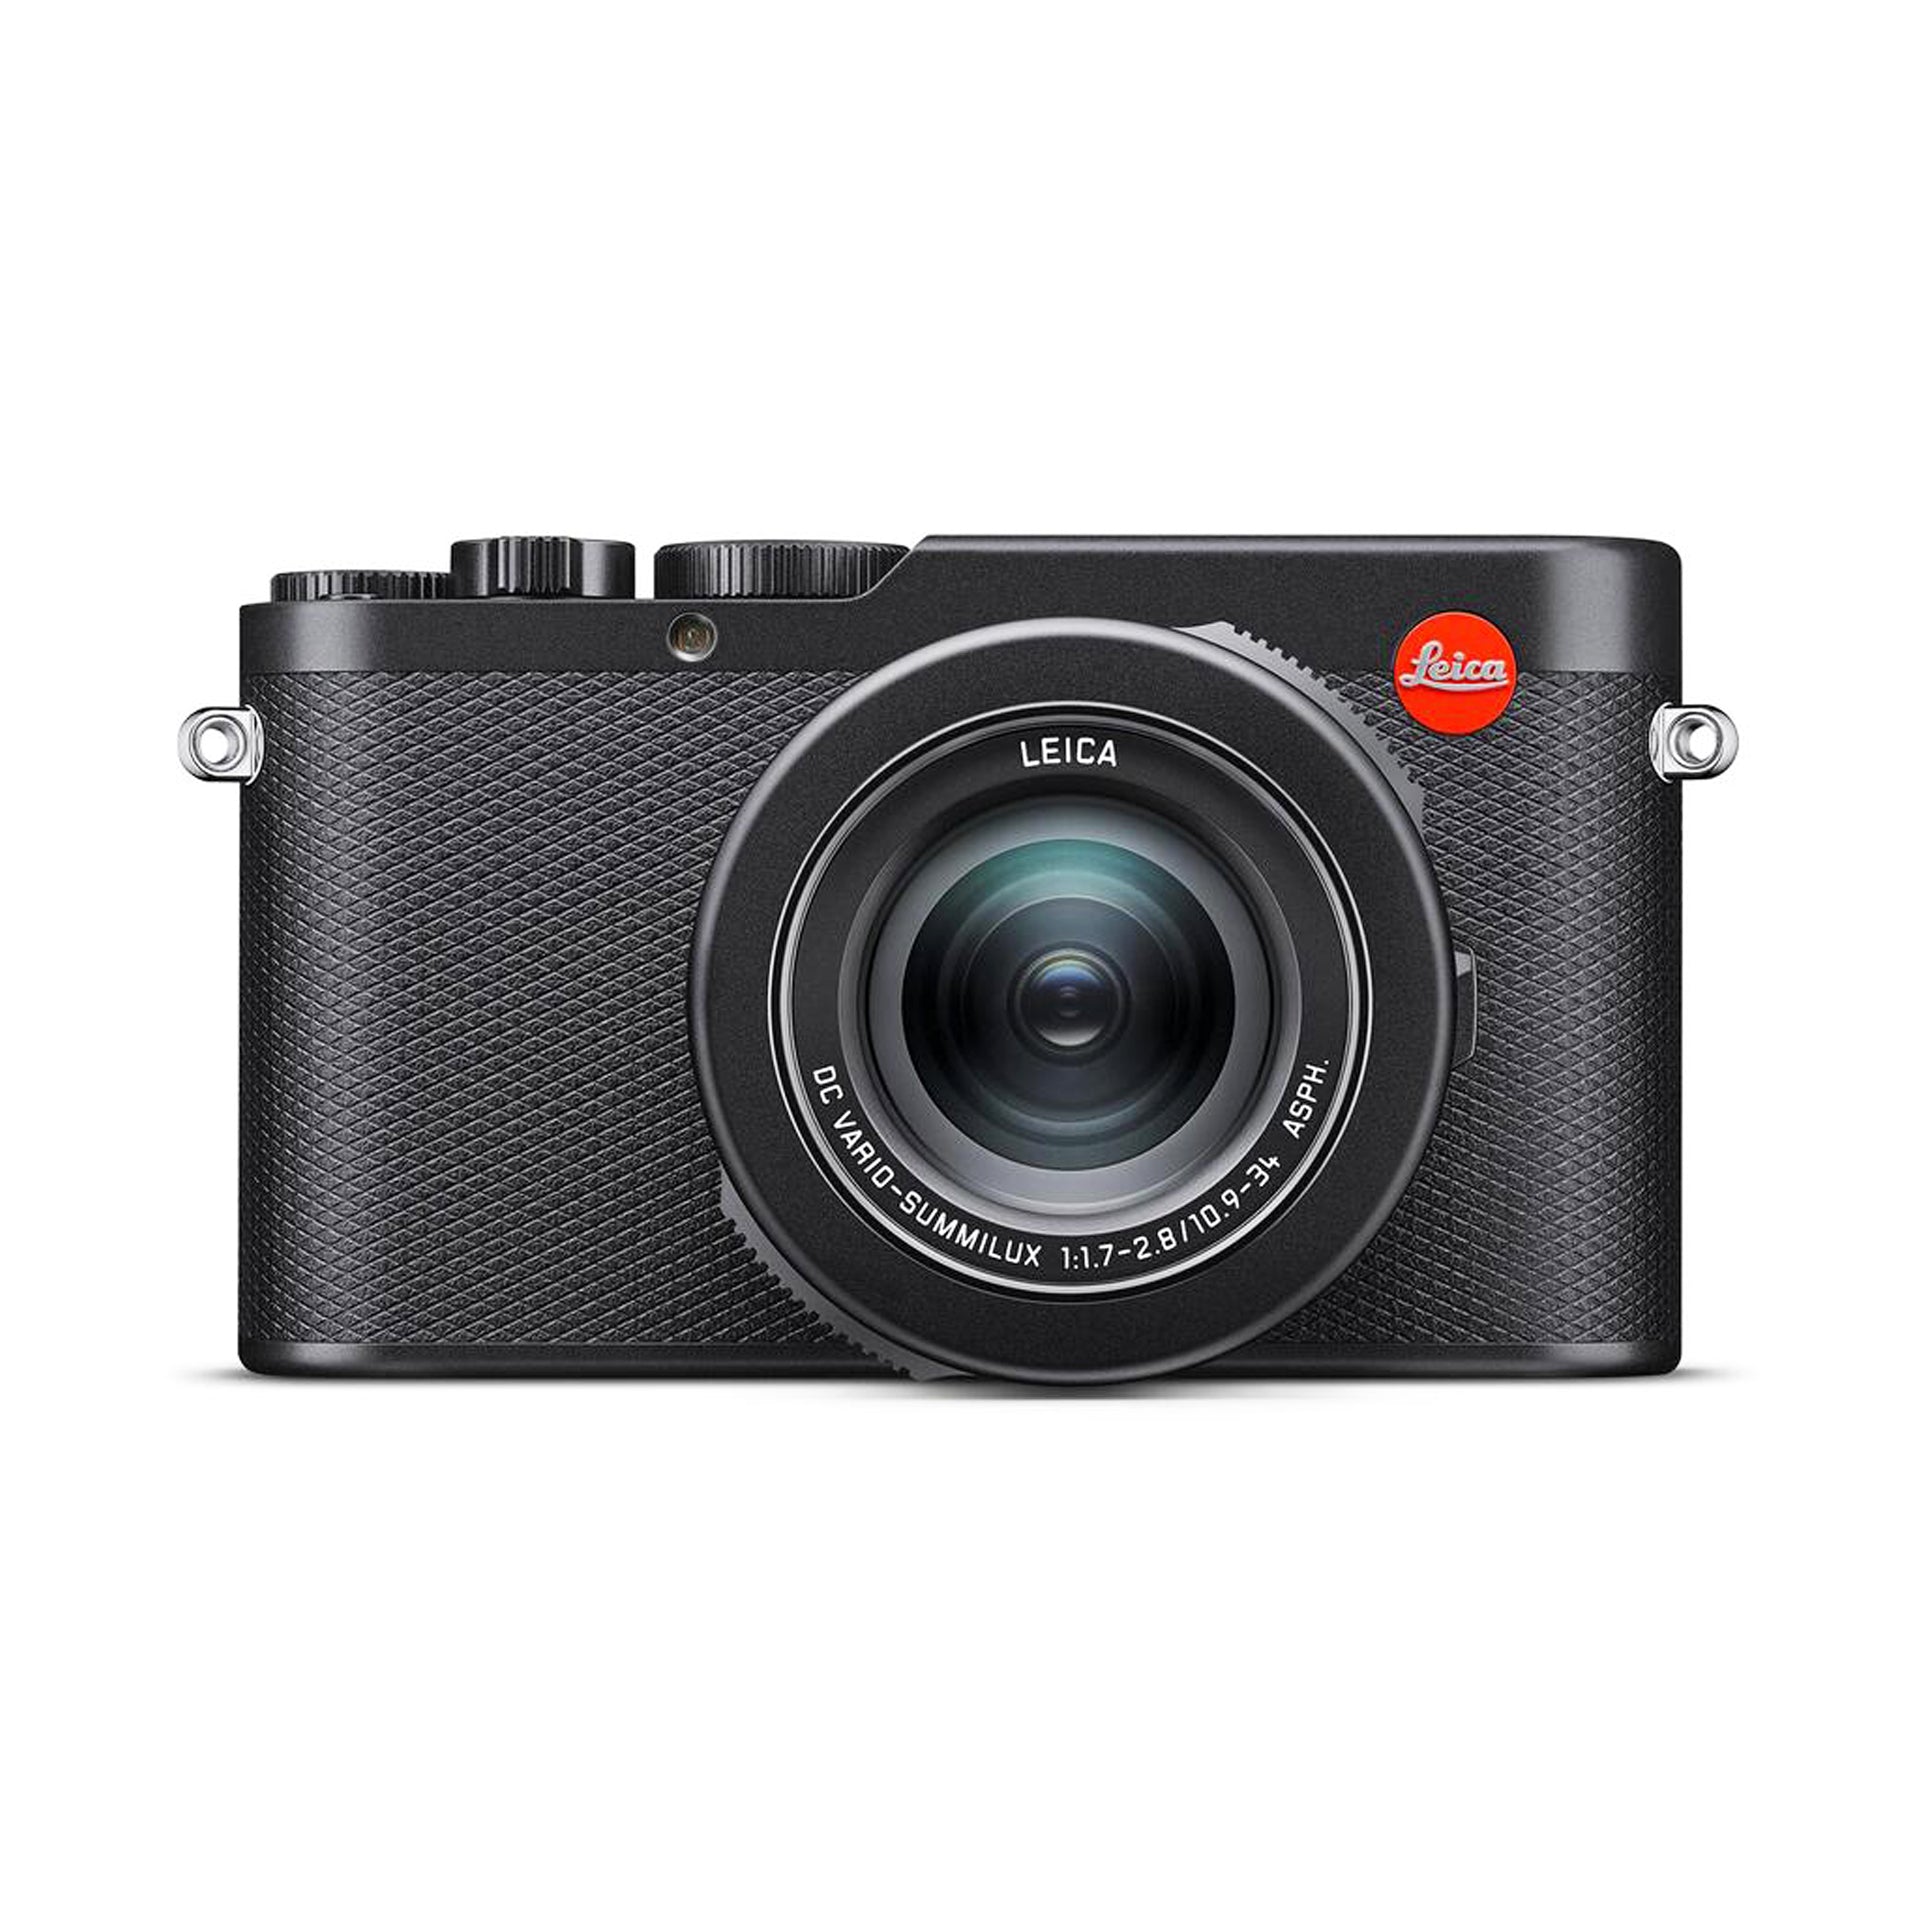 Leica D-Lux 8 | Uncrate Supply, #Leica #DLux #Uncrate #Supply